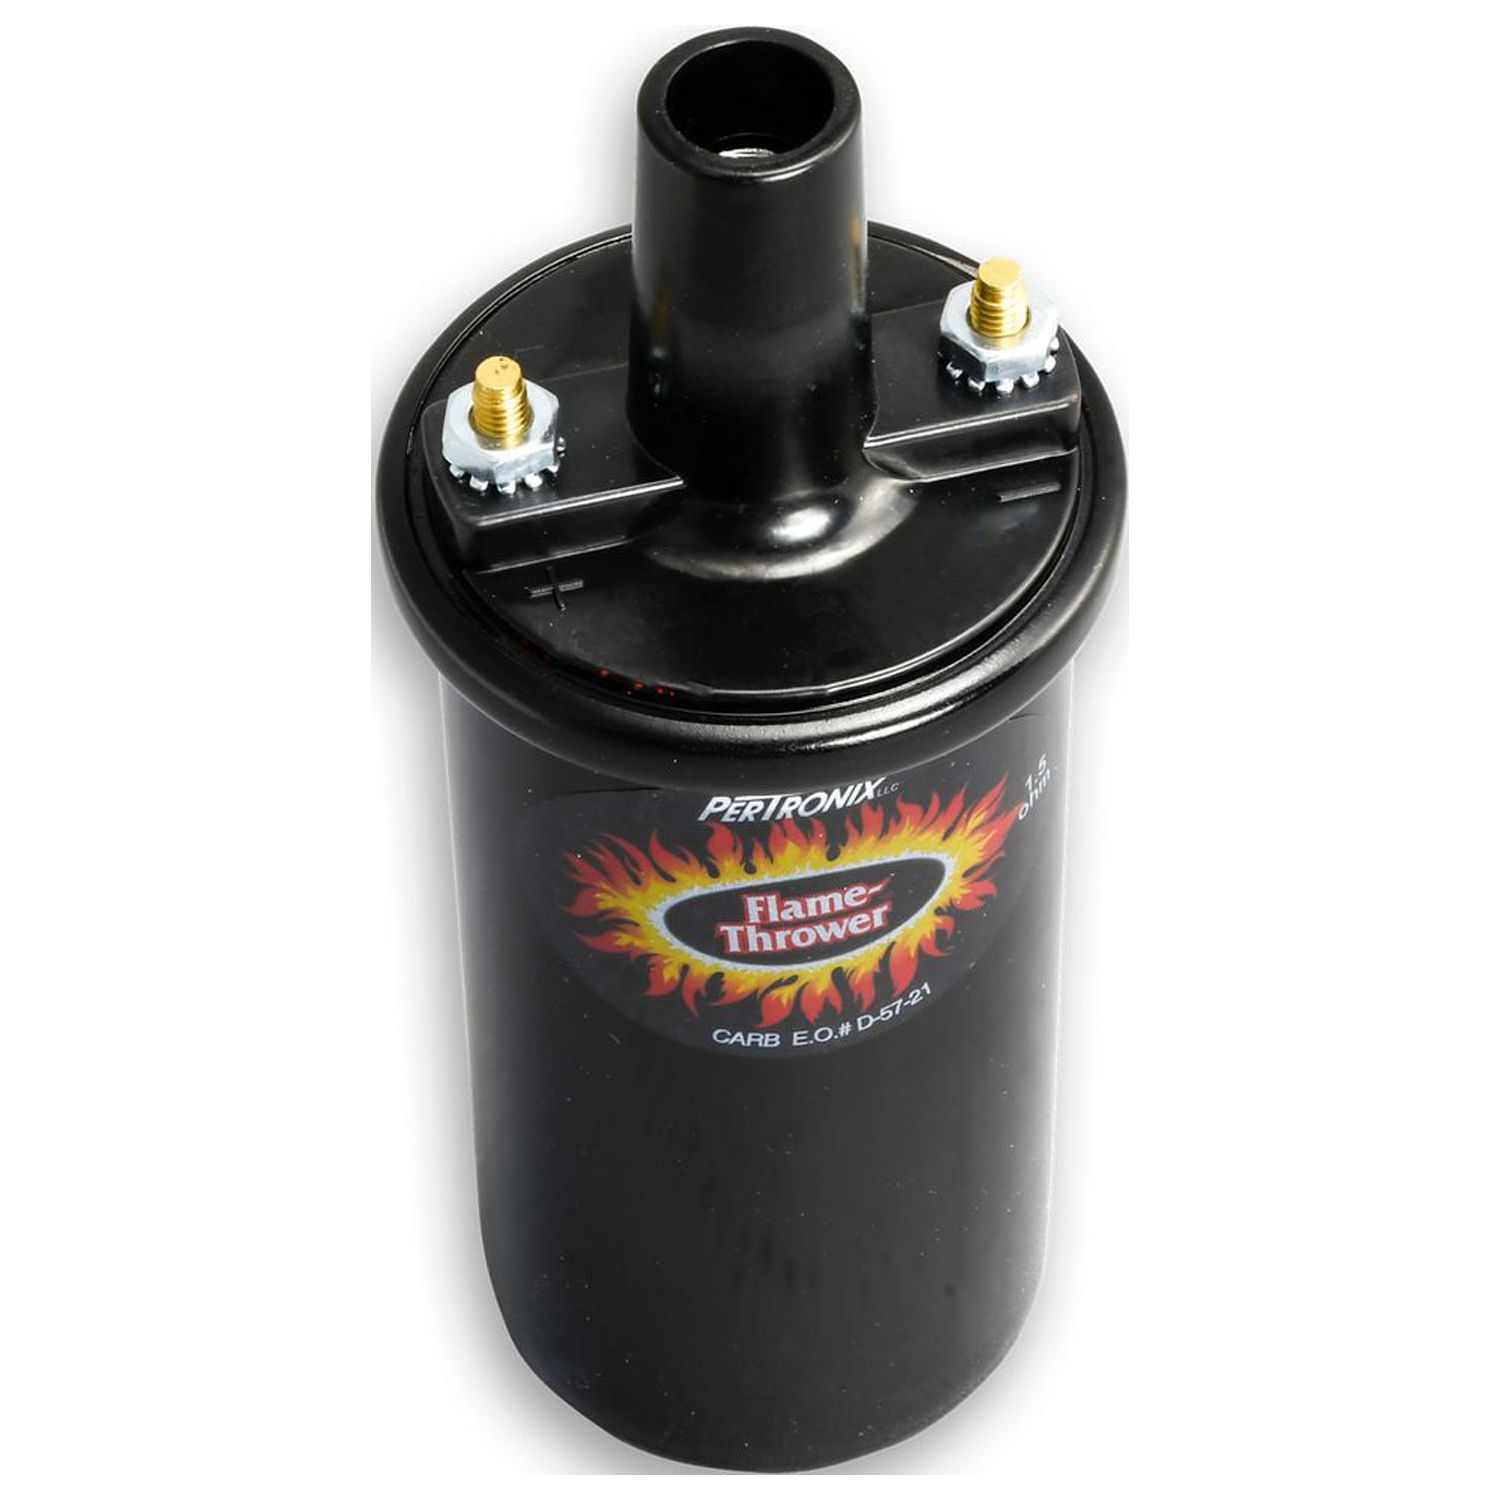 Pertronix 40011 Flame-Thrower Coil 40,000 Volt 1.5 ohm Black - image 2 of 4